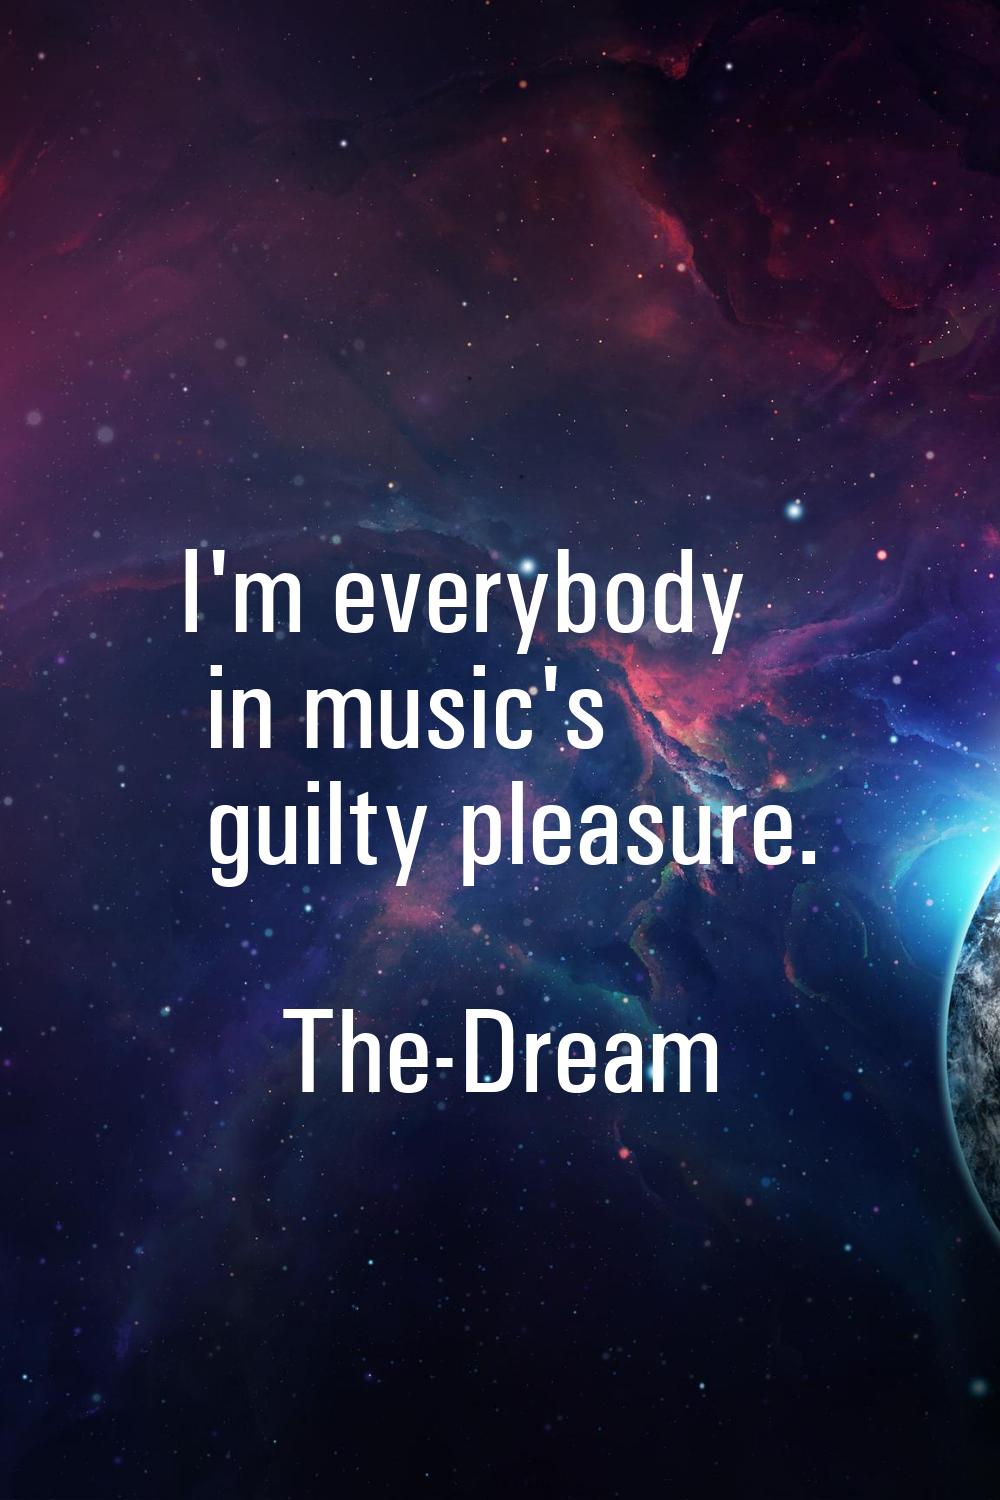 I'm everybody in music's guilty pleasure.